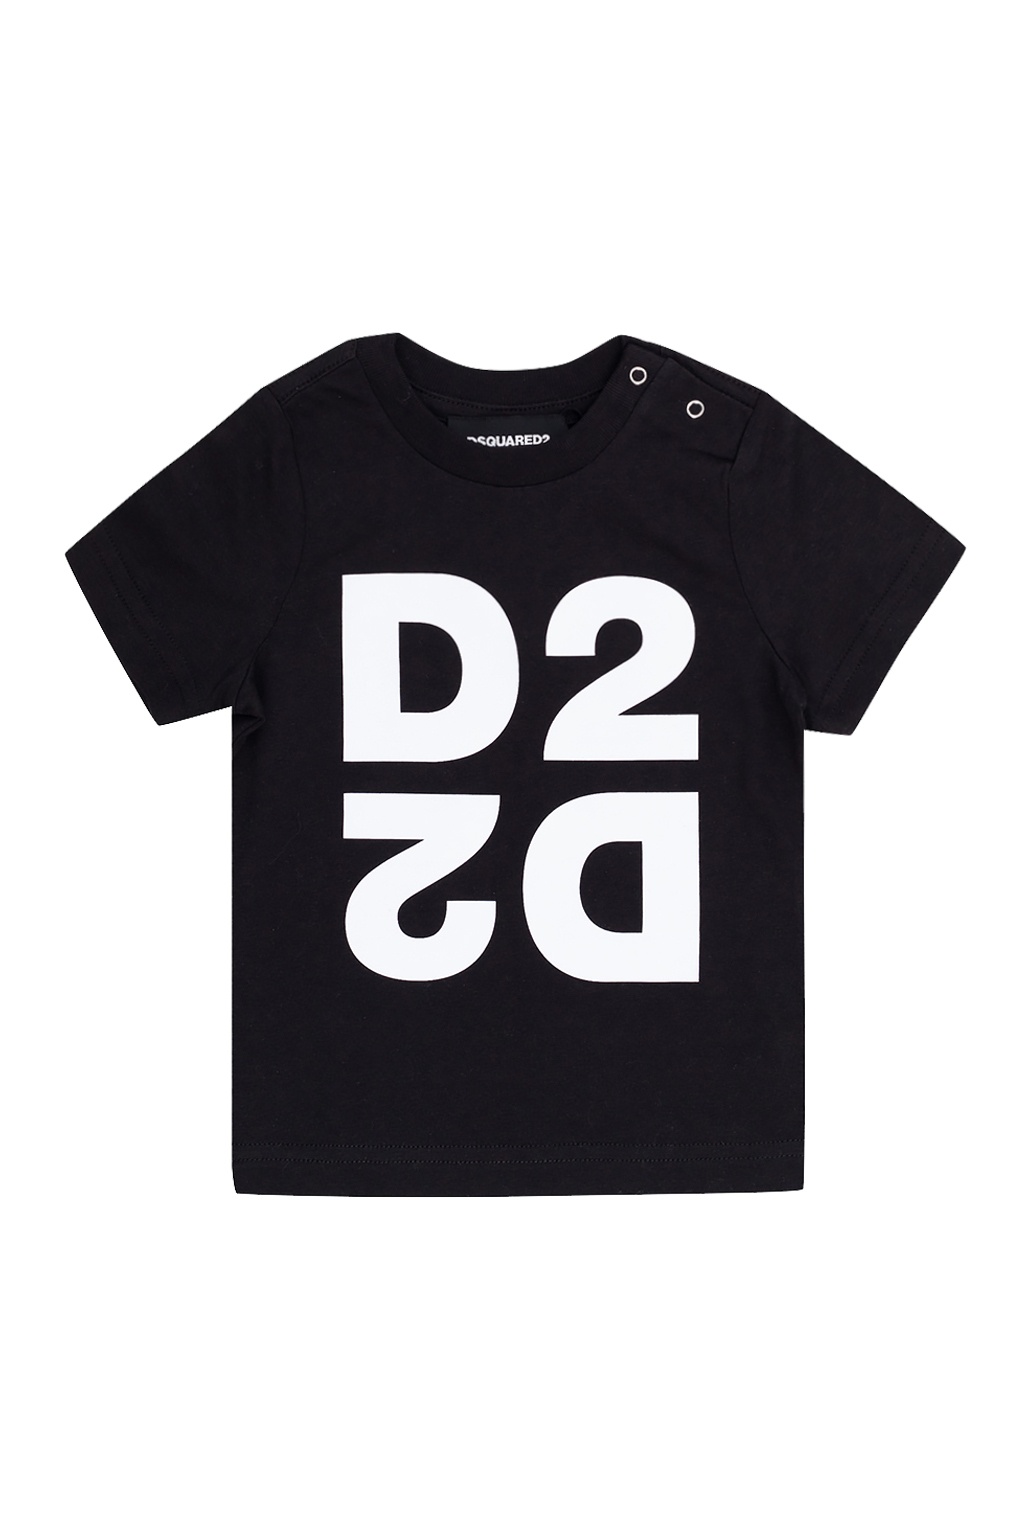 dsquared kids size guide